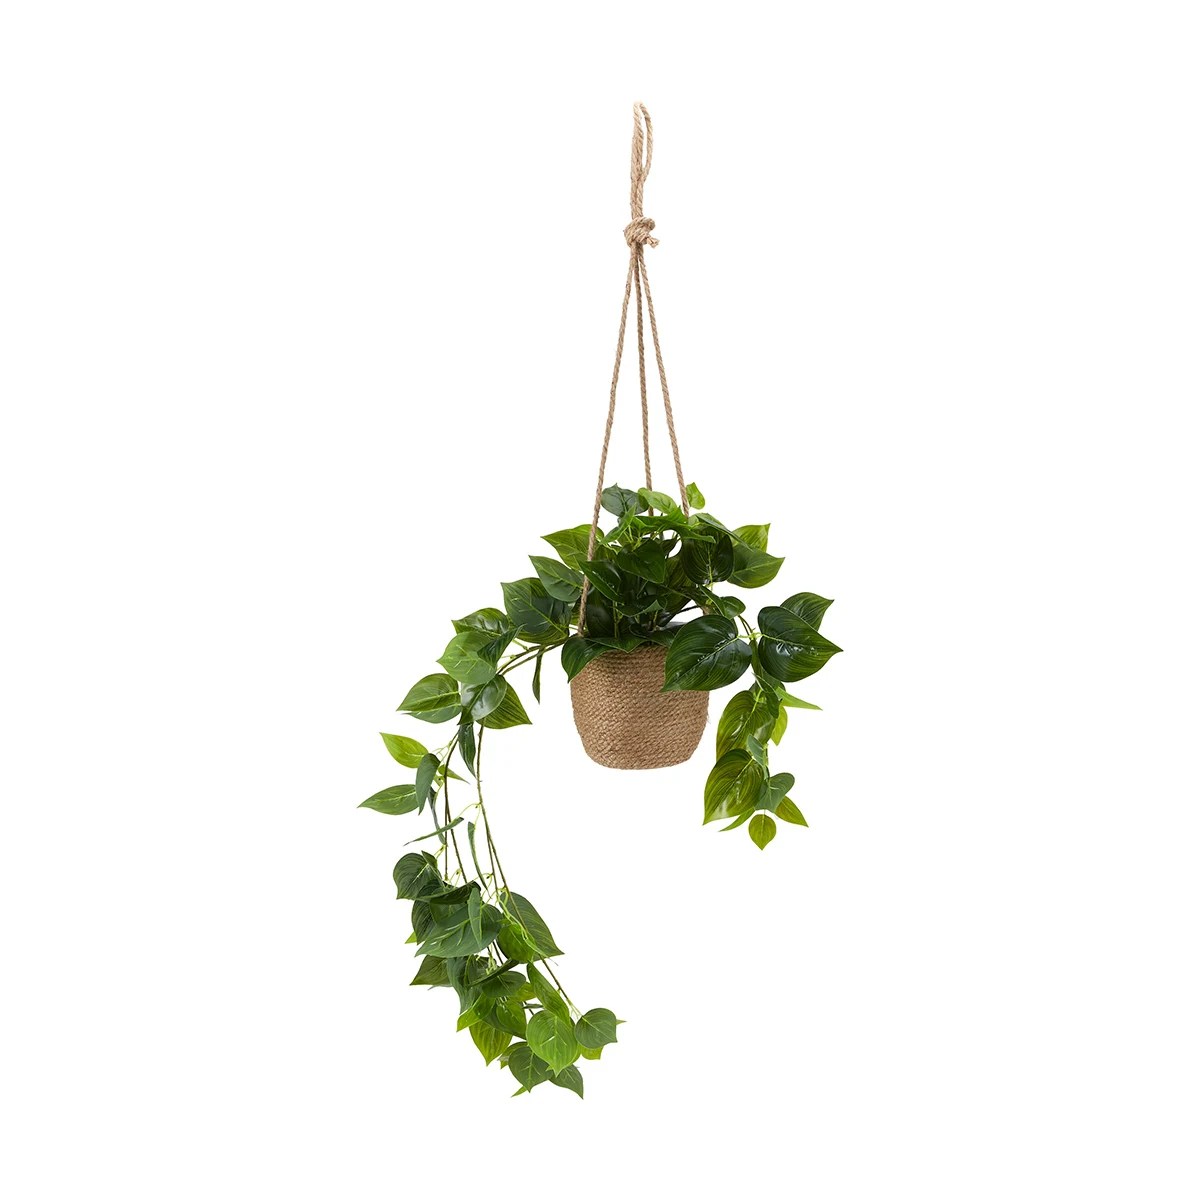 Hanging Plants Indoor | Discover the Top 10 Hanging Plants at Kmart for a Greener, Healthier Home